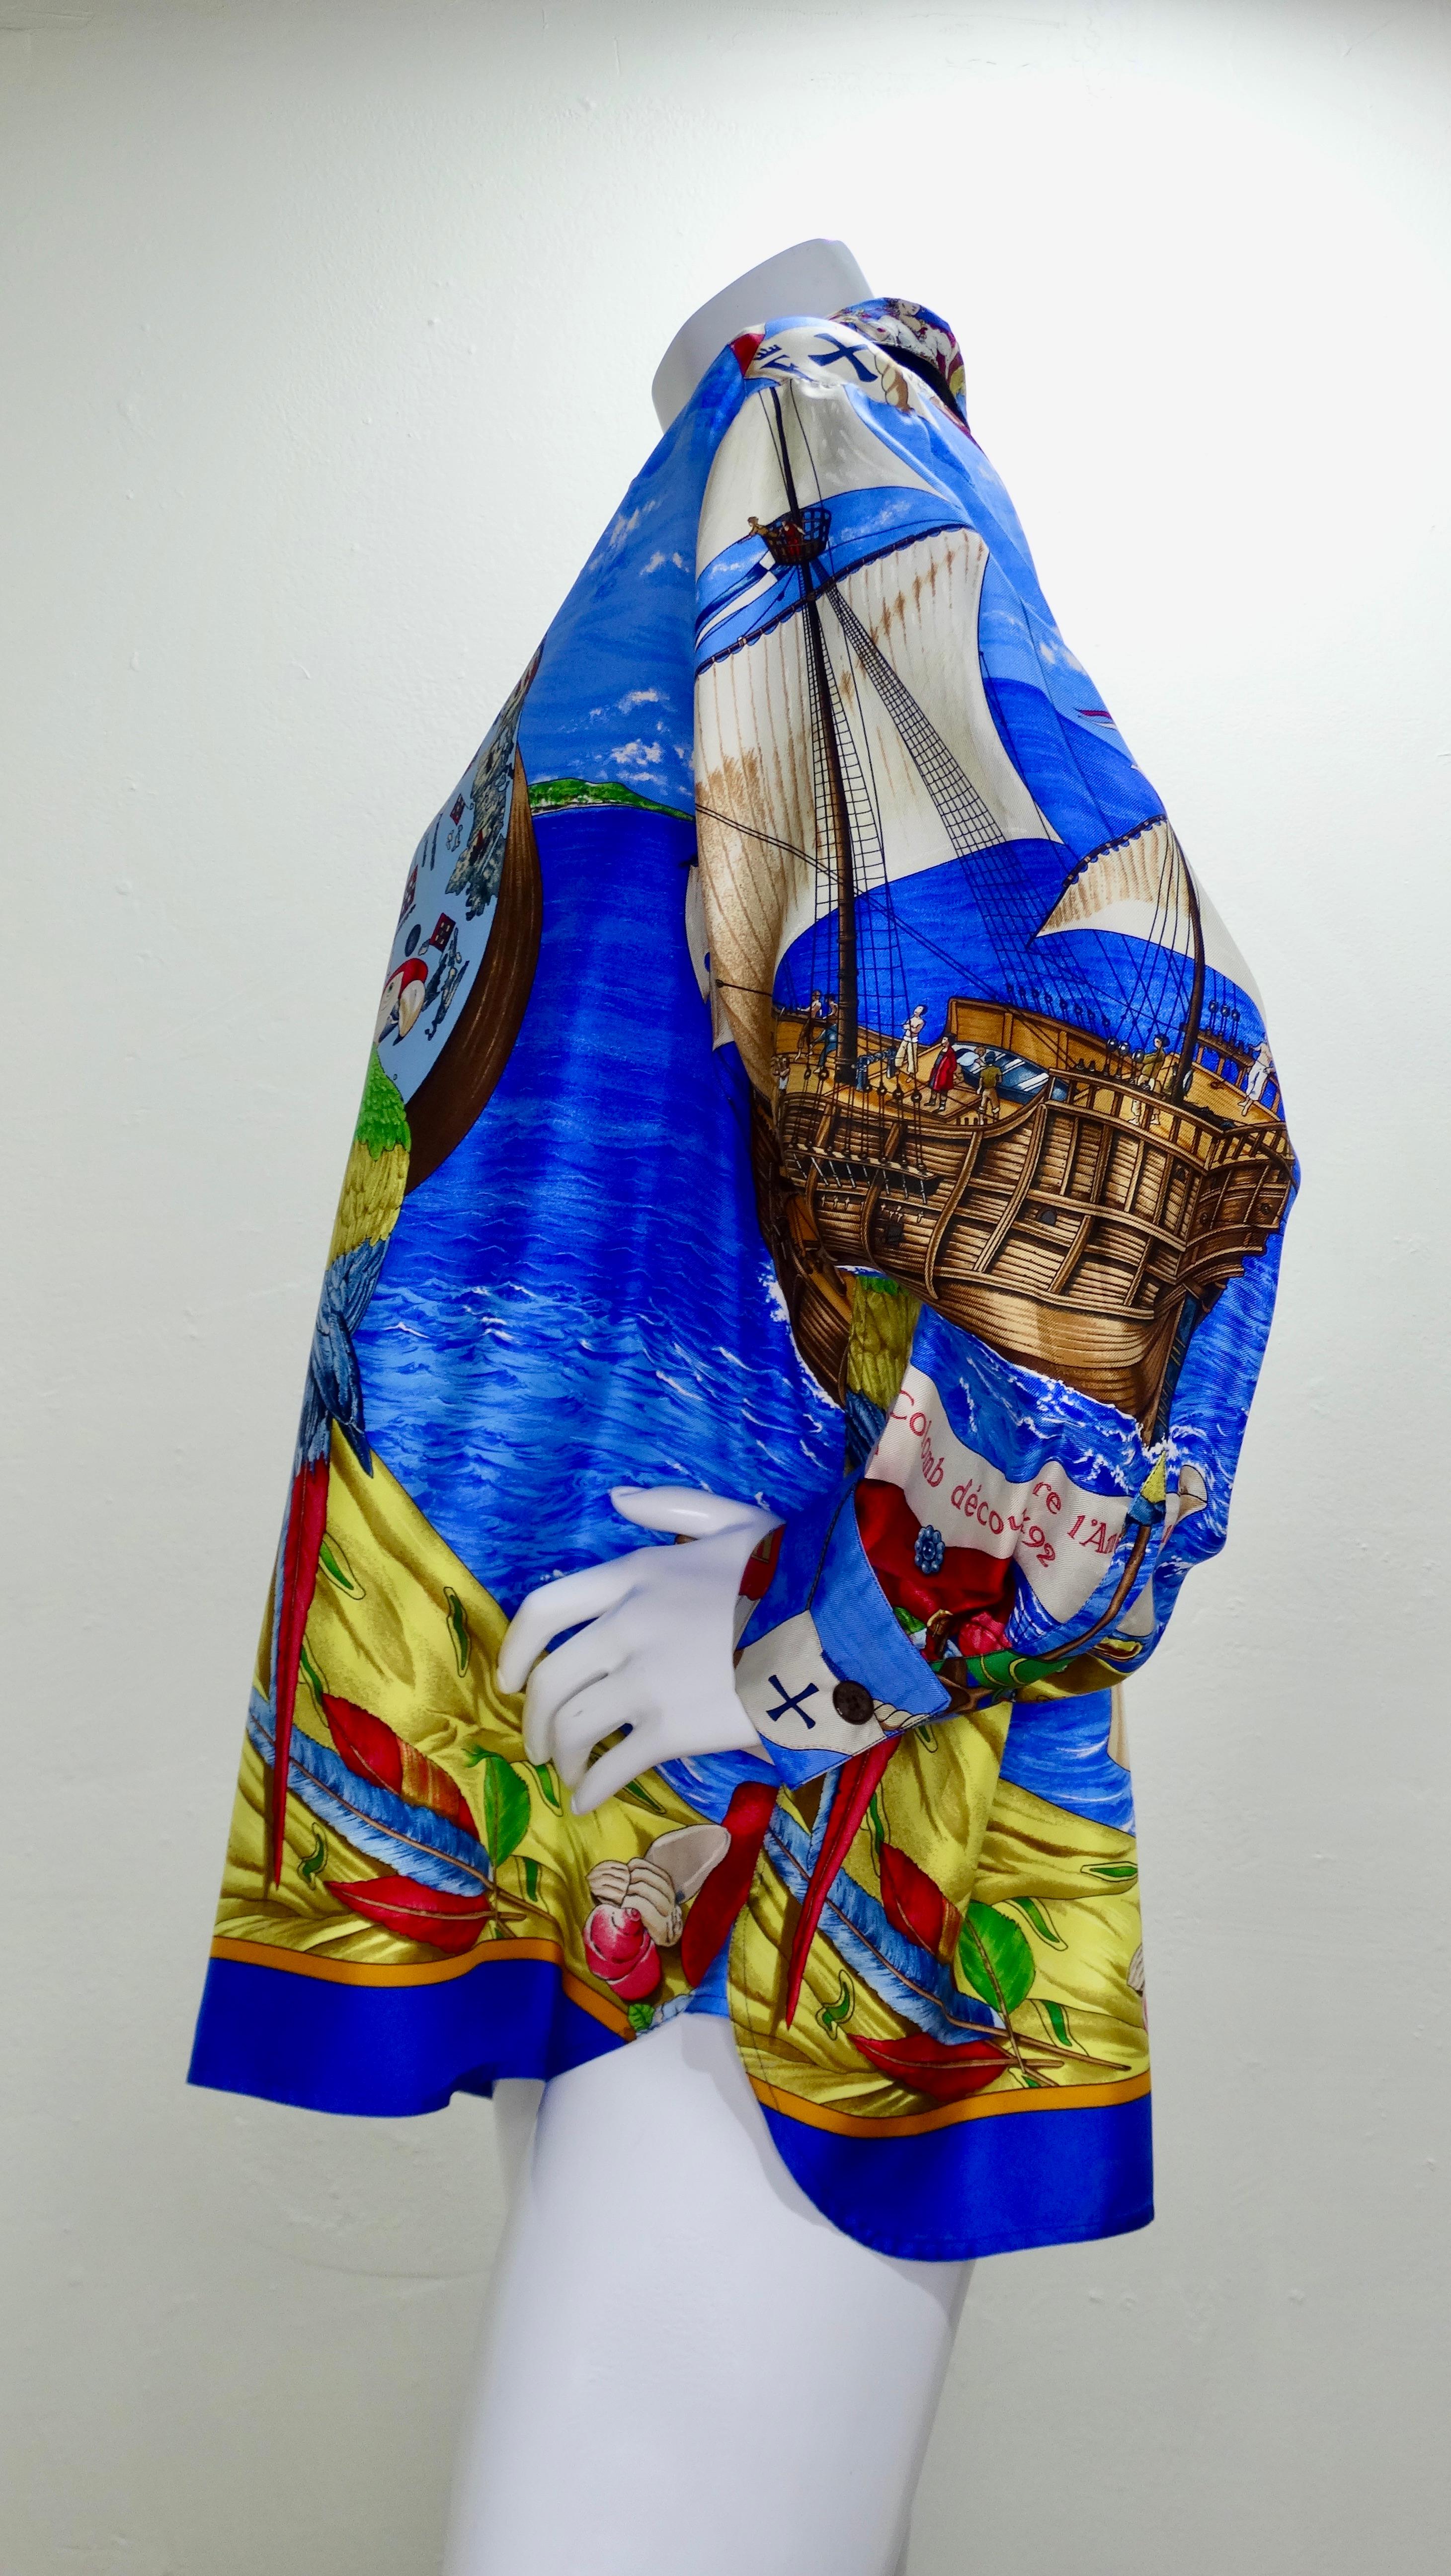 Complete your Hermes collection with this amazing and rare piece! Circa 1992 designed by Carl de Parcevaux, this design is titled 'Christophe Colomb Decouvre l’Amerique' or Christopher Columbus Discovers America. It features a colorful motif